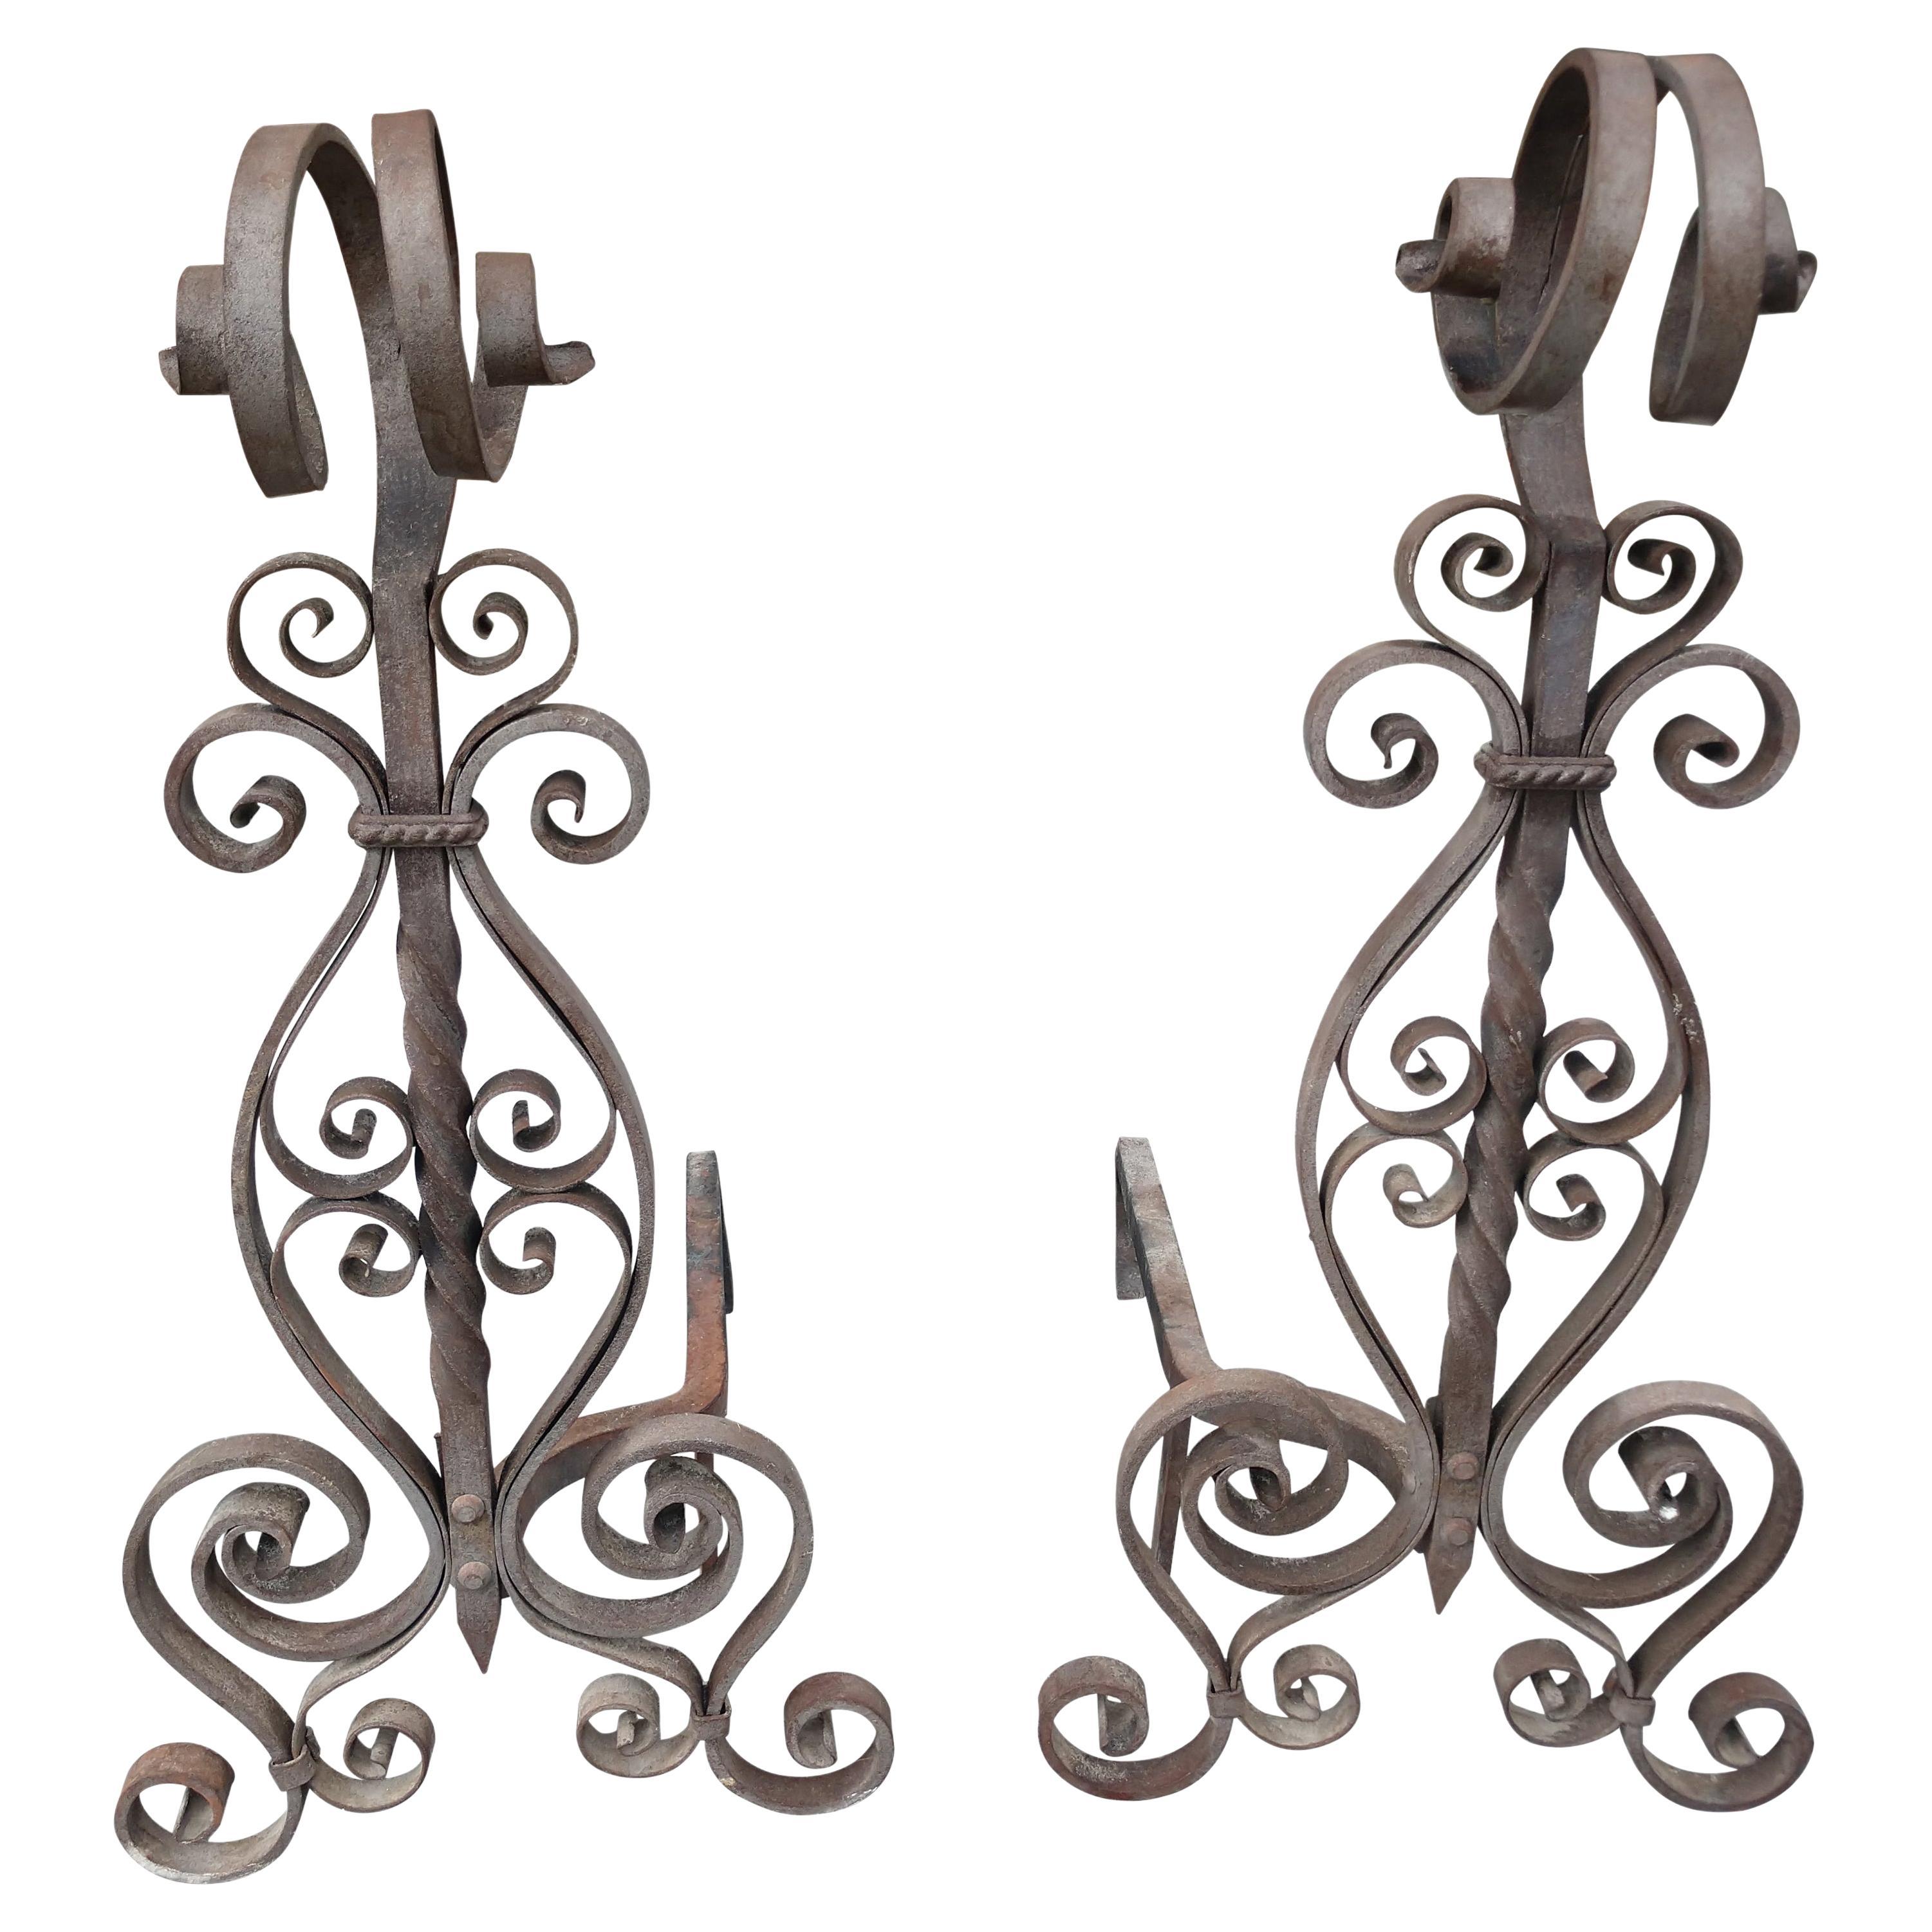 Pair of Arts & Crafts Spanish Mission Style Andirons, C1910